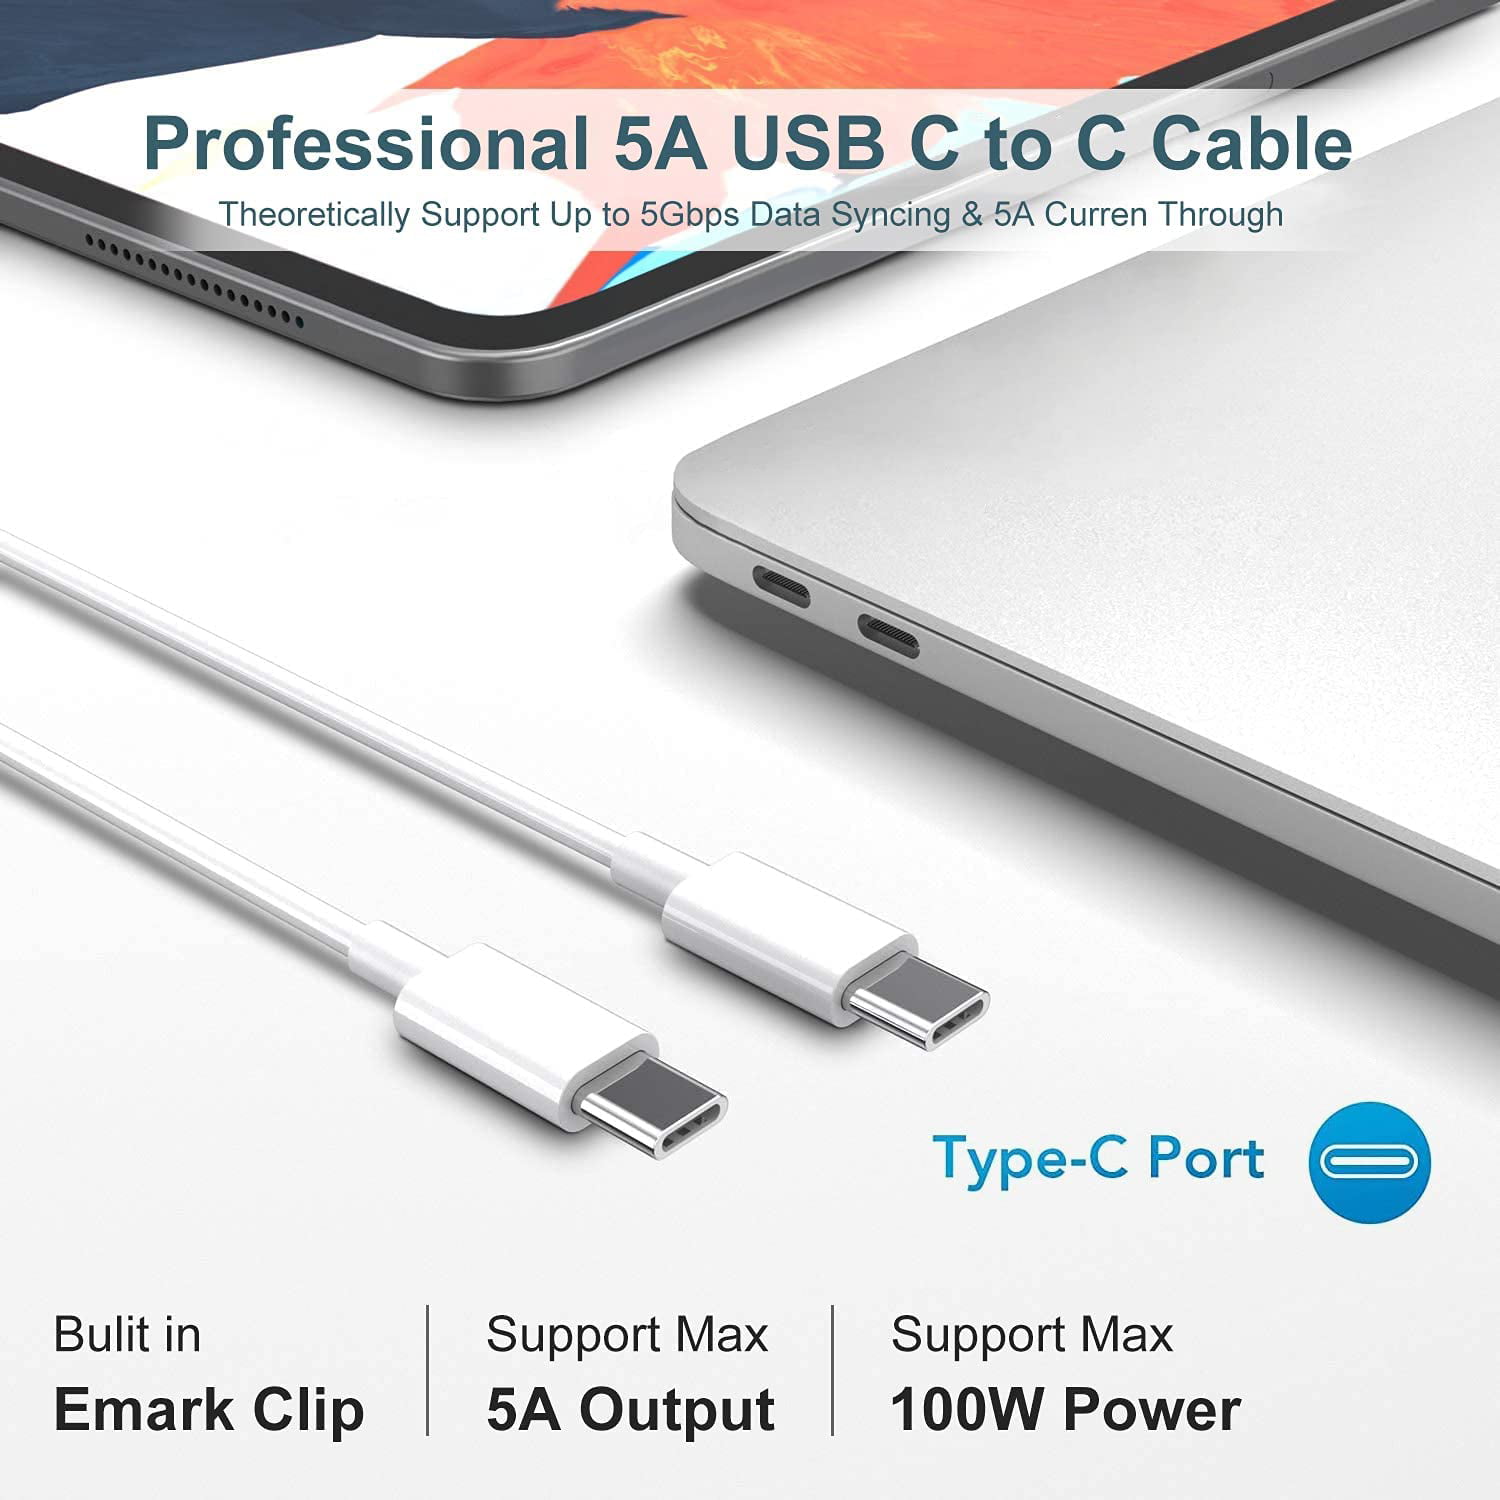 Included 7.2ft USB C to C Charge Cable 100W USB C Charger Mac Book Pro Charger Power Adapter Compatible with MacBook Pro 16/15/13inch iPad Pro 2021/2020/2019/2018 UL Listed MacBook air 13inch 